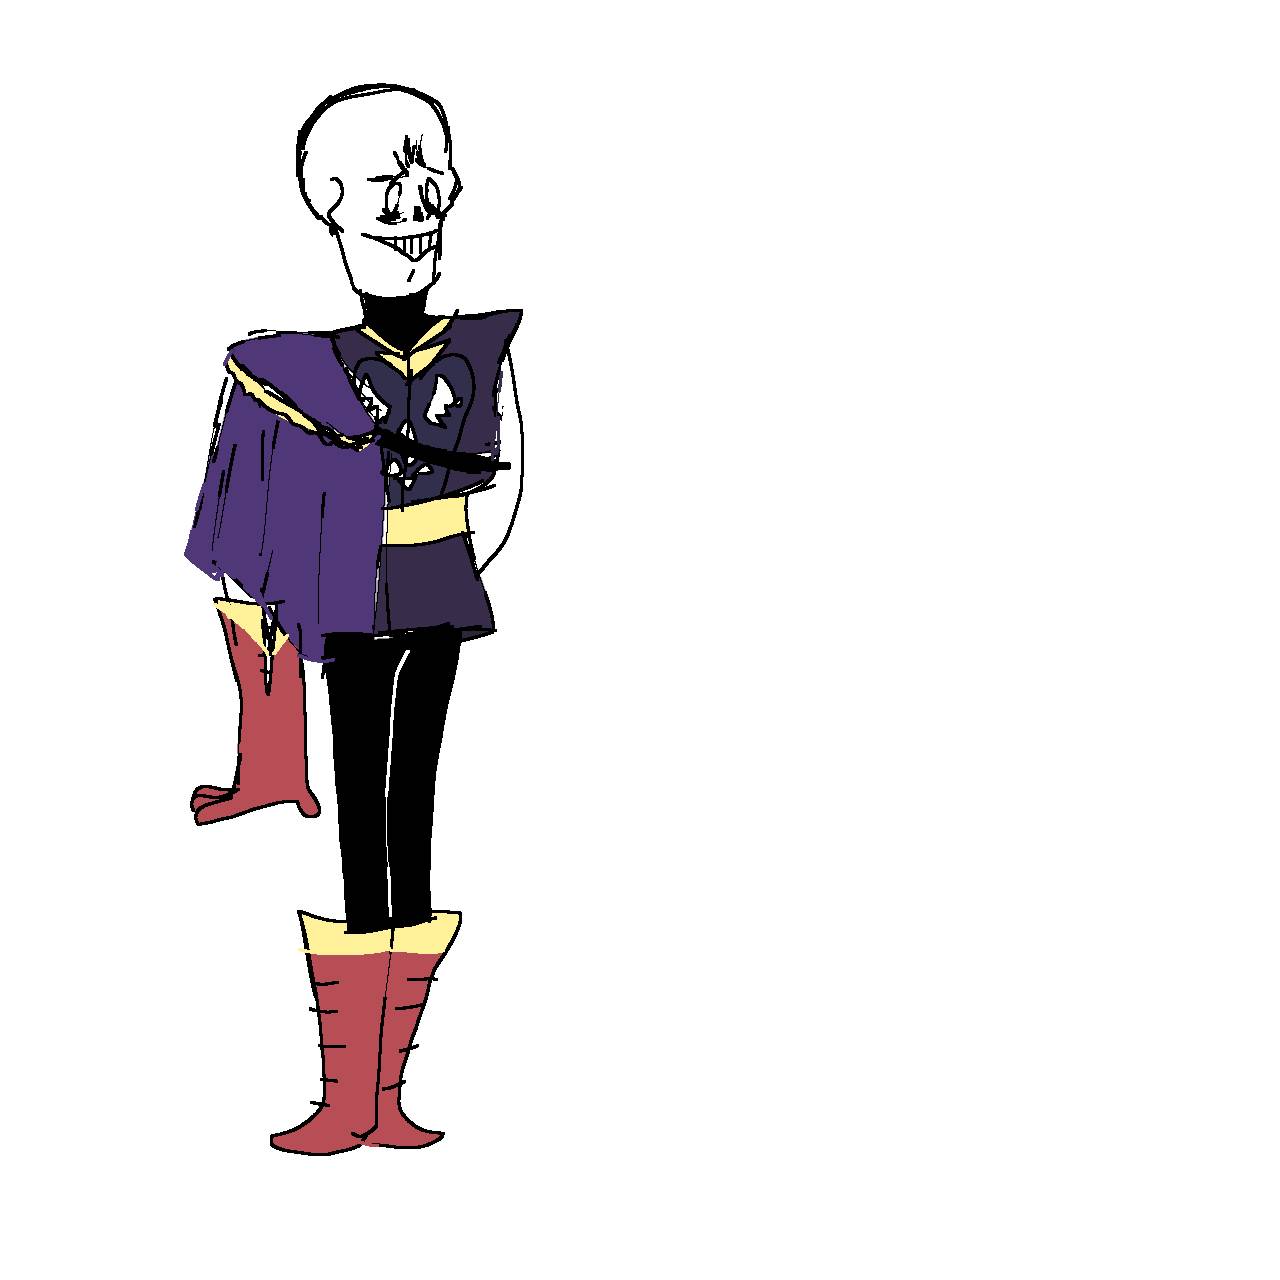 Bloody Sans and Papyrus (swaphorror canon) by Giovanish on DeviantArt